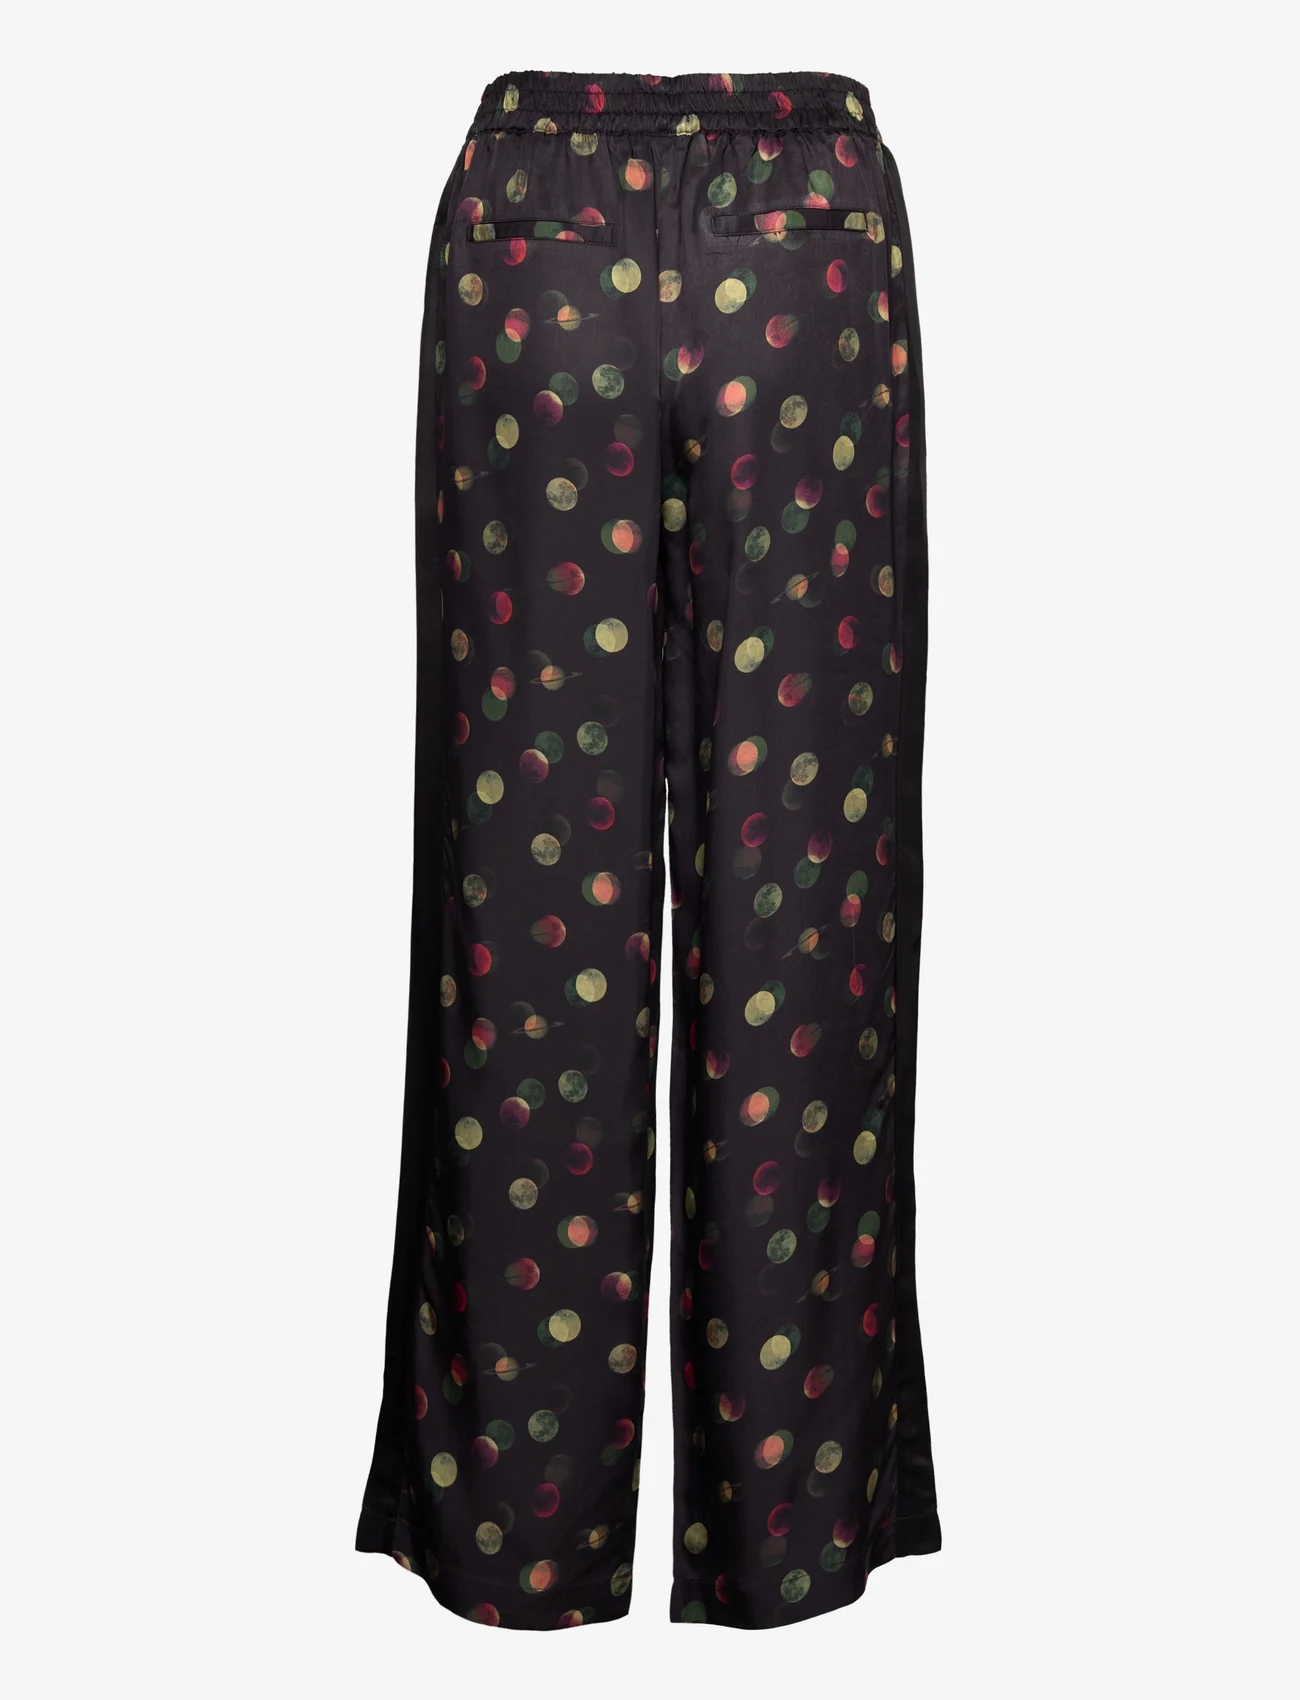 Scotch & Soda - Gia - Mid rise wide leg printed elasticated trousers - straight leg trousers - planets - 1